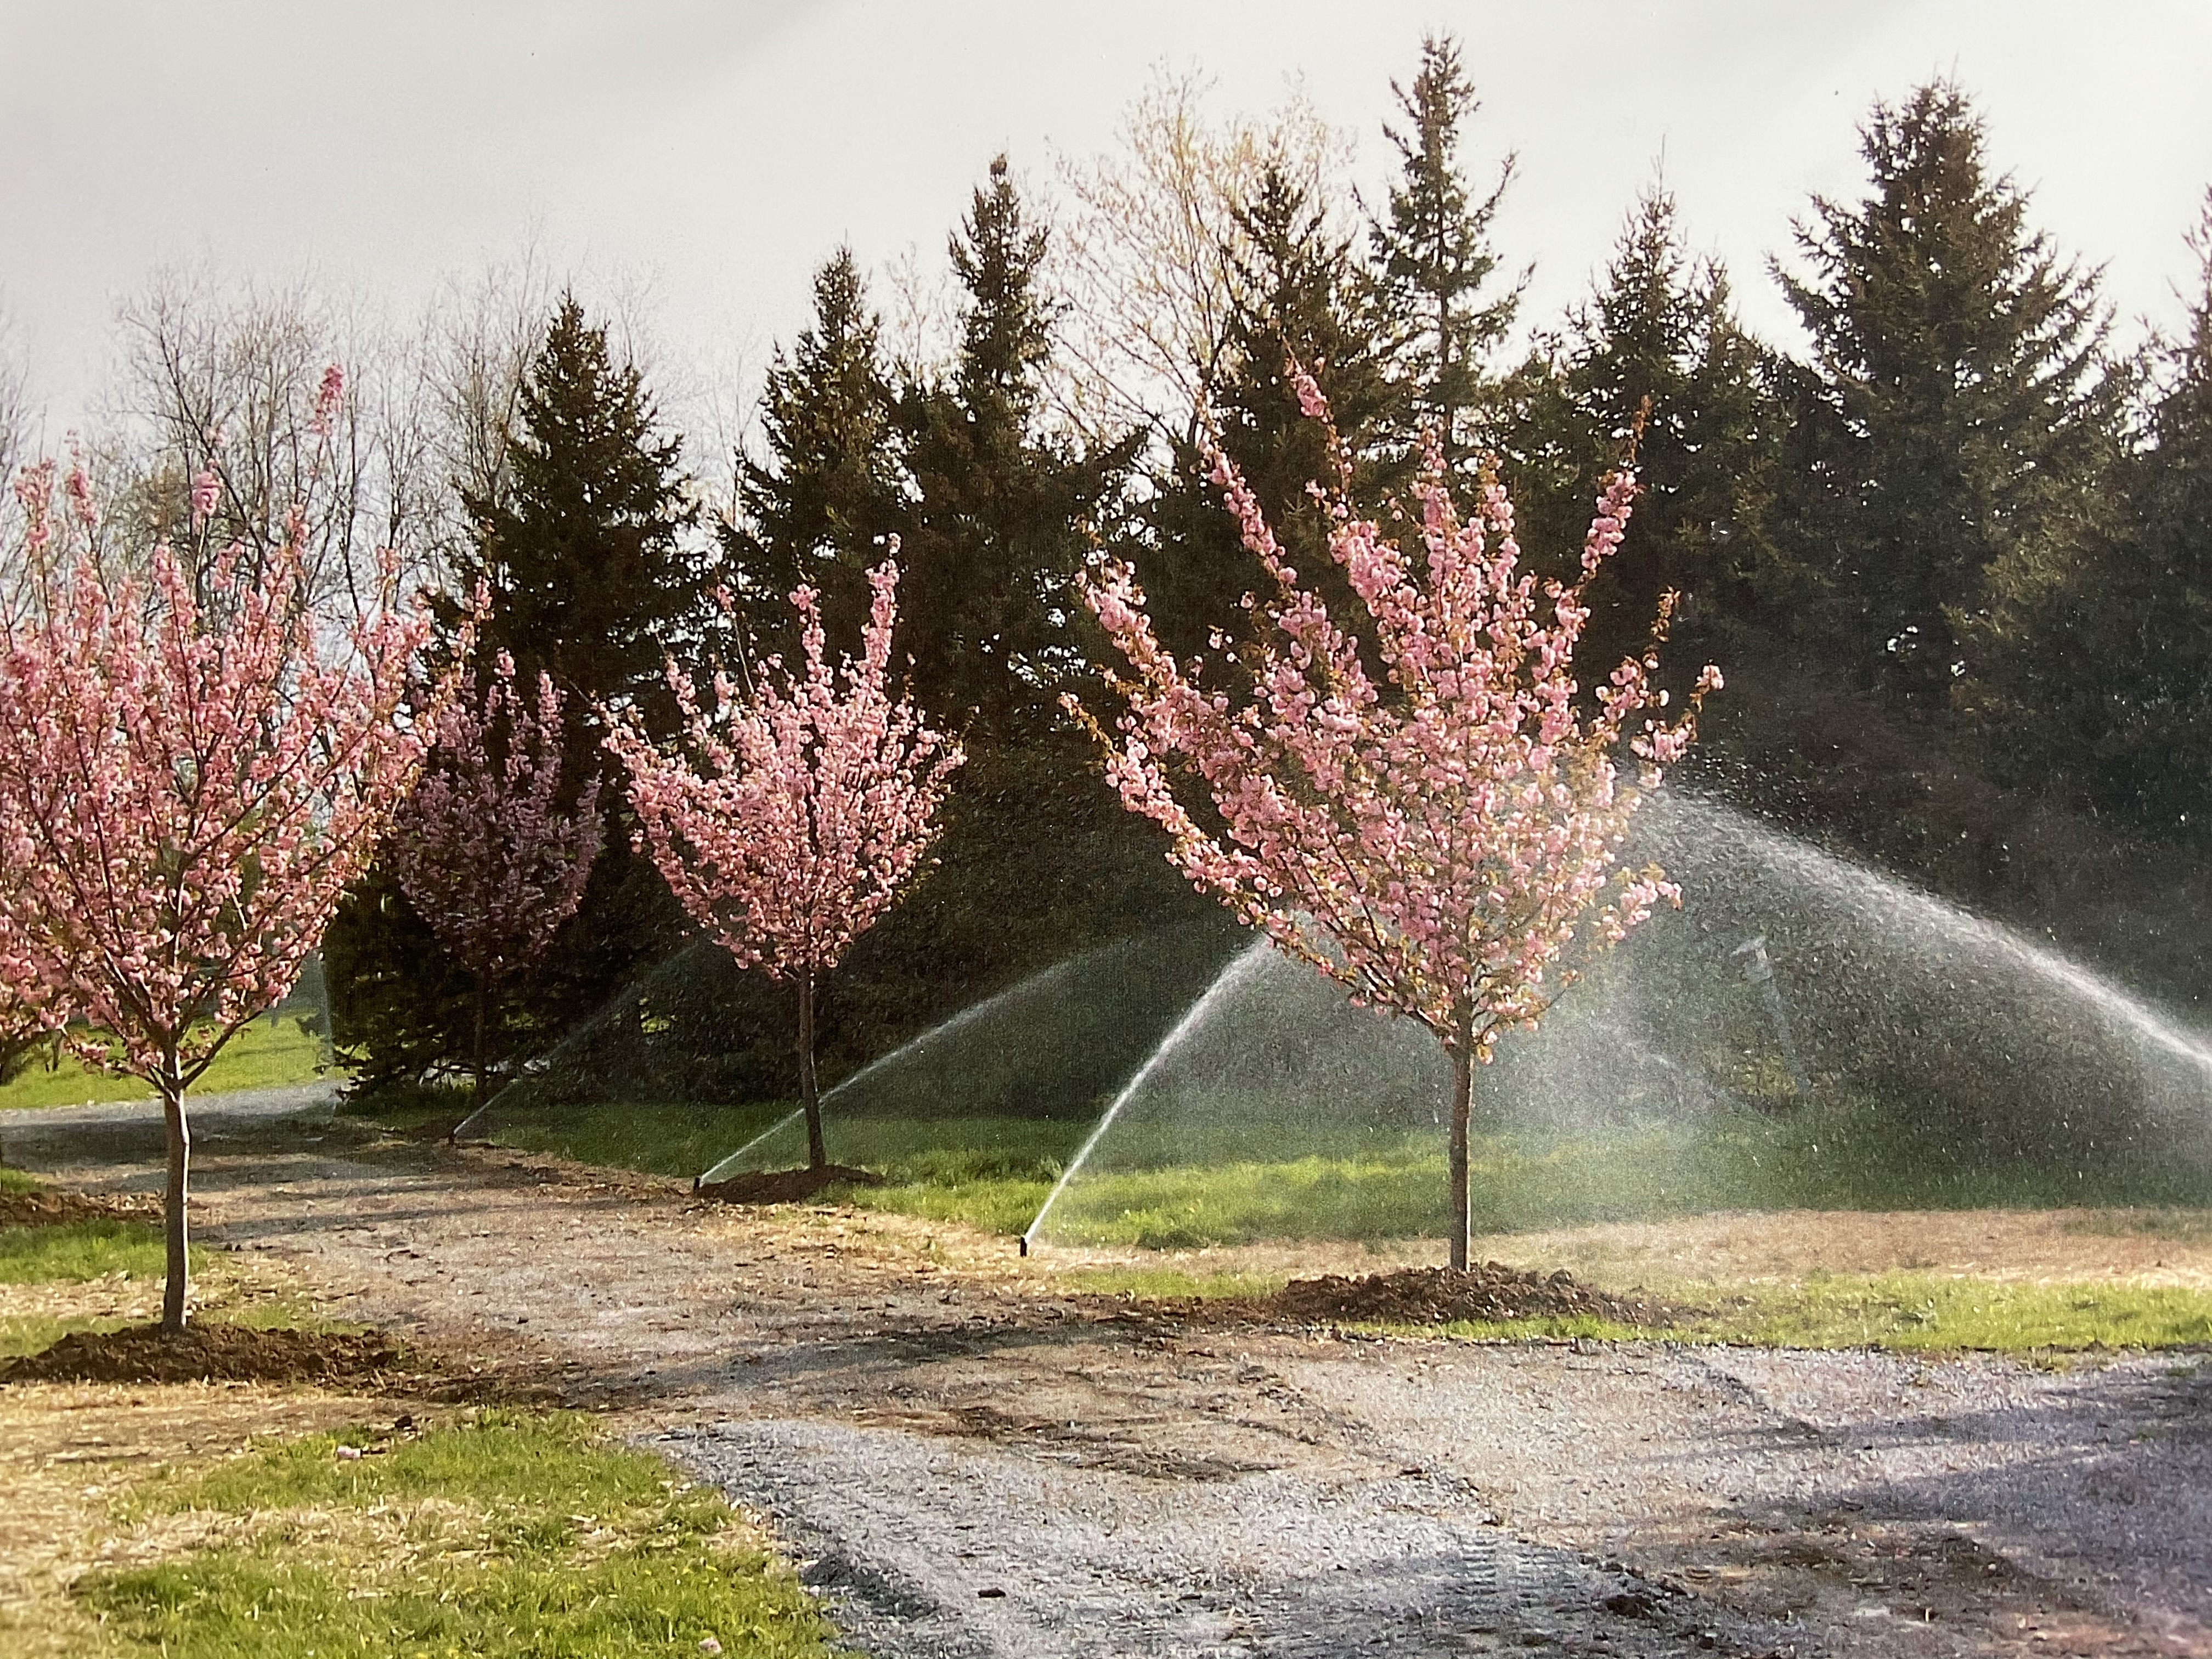 Flowering Tree Entry and Irrigation System